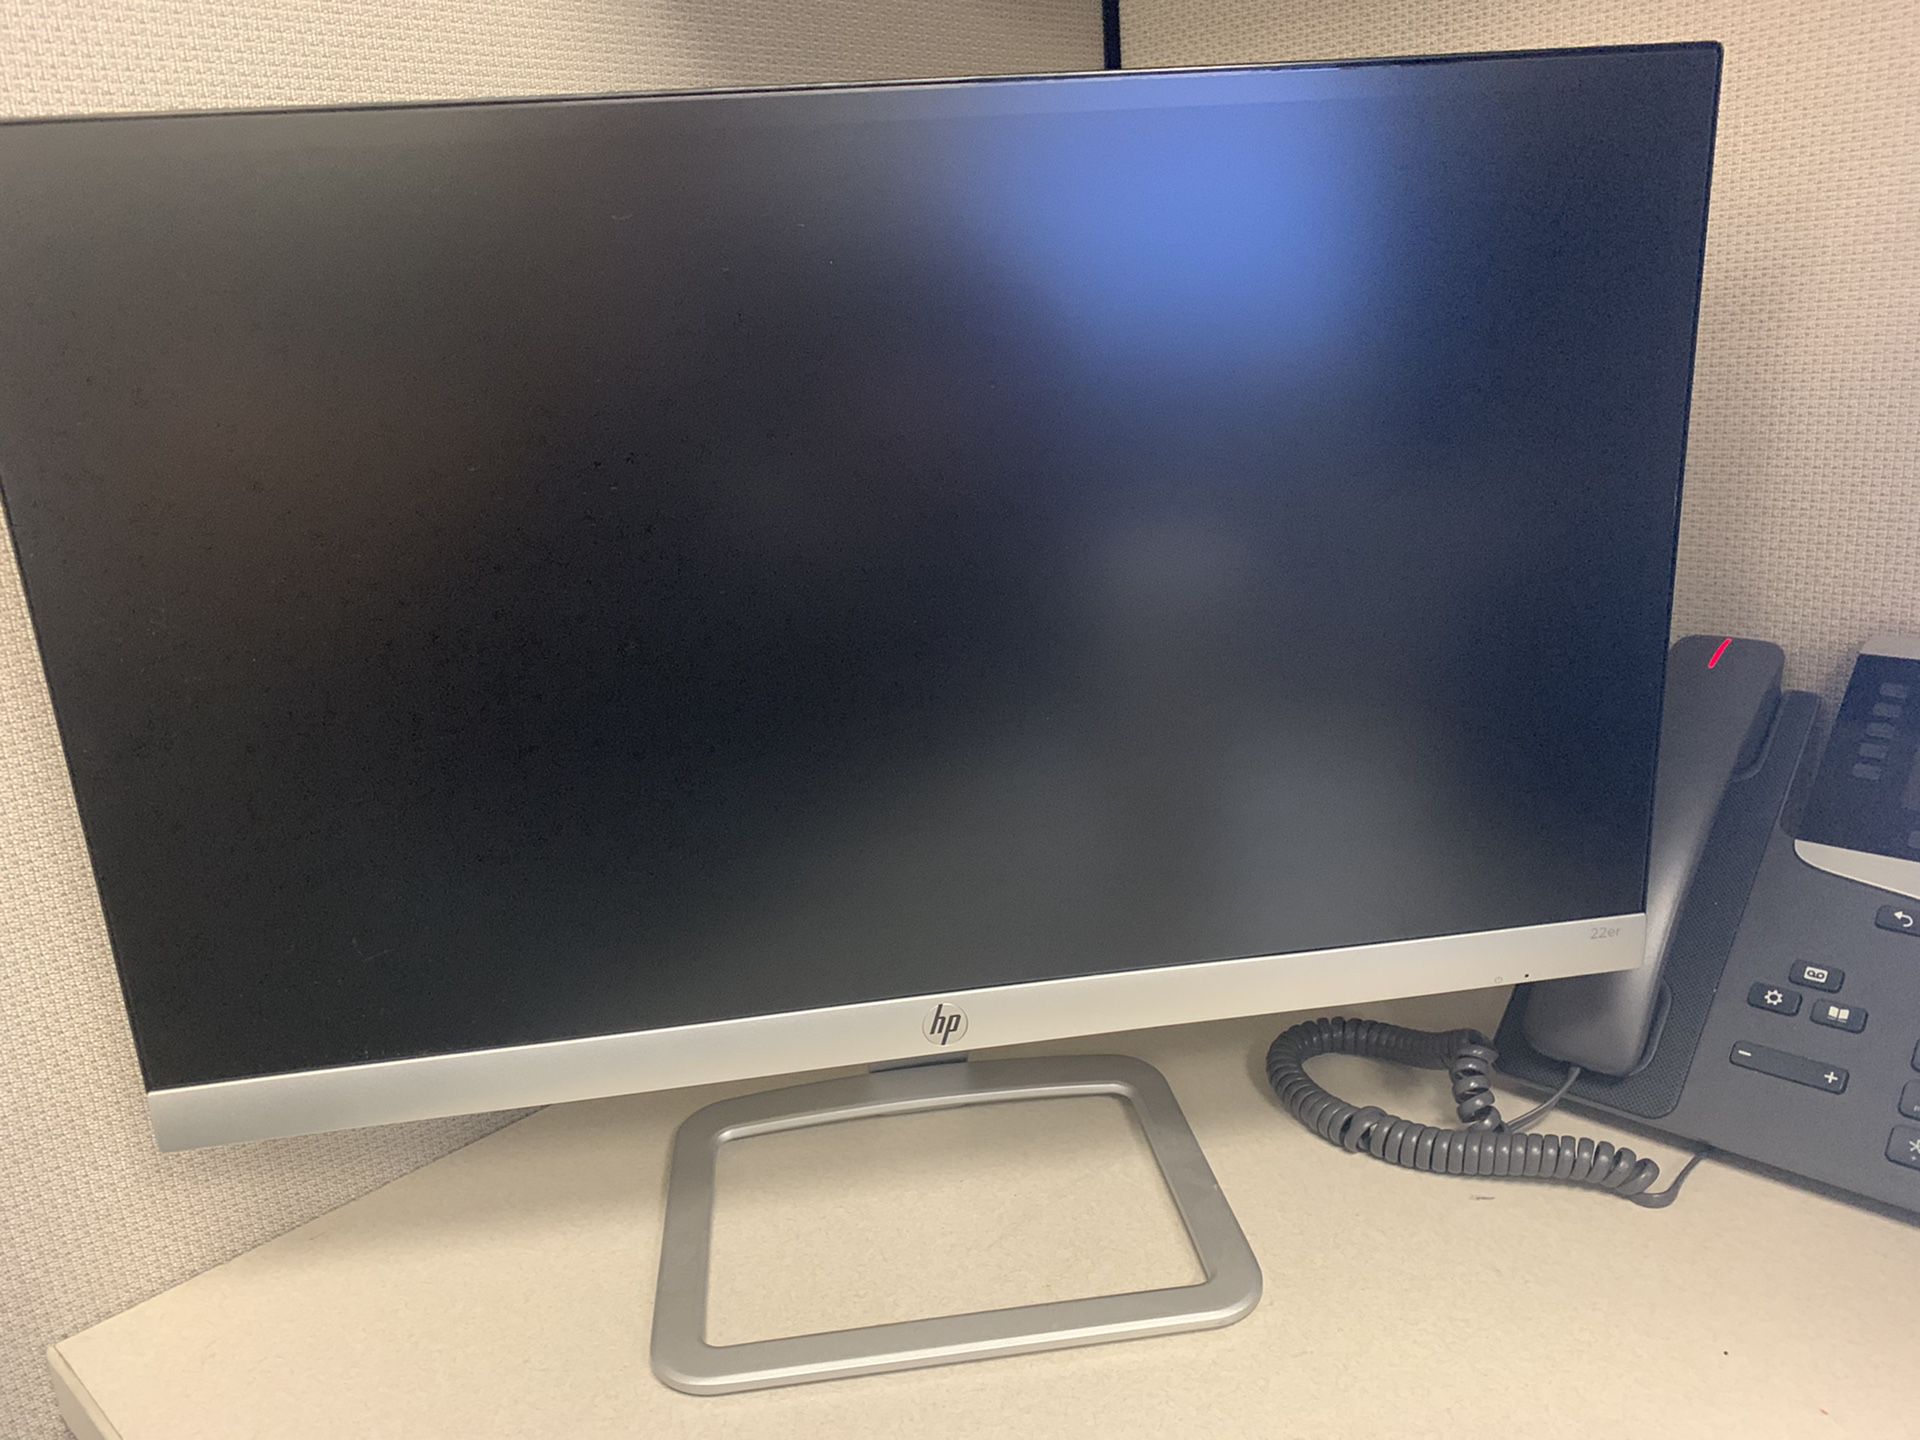 Hp computer monitor 21.5 in